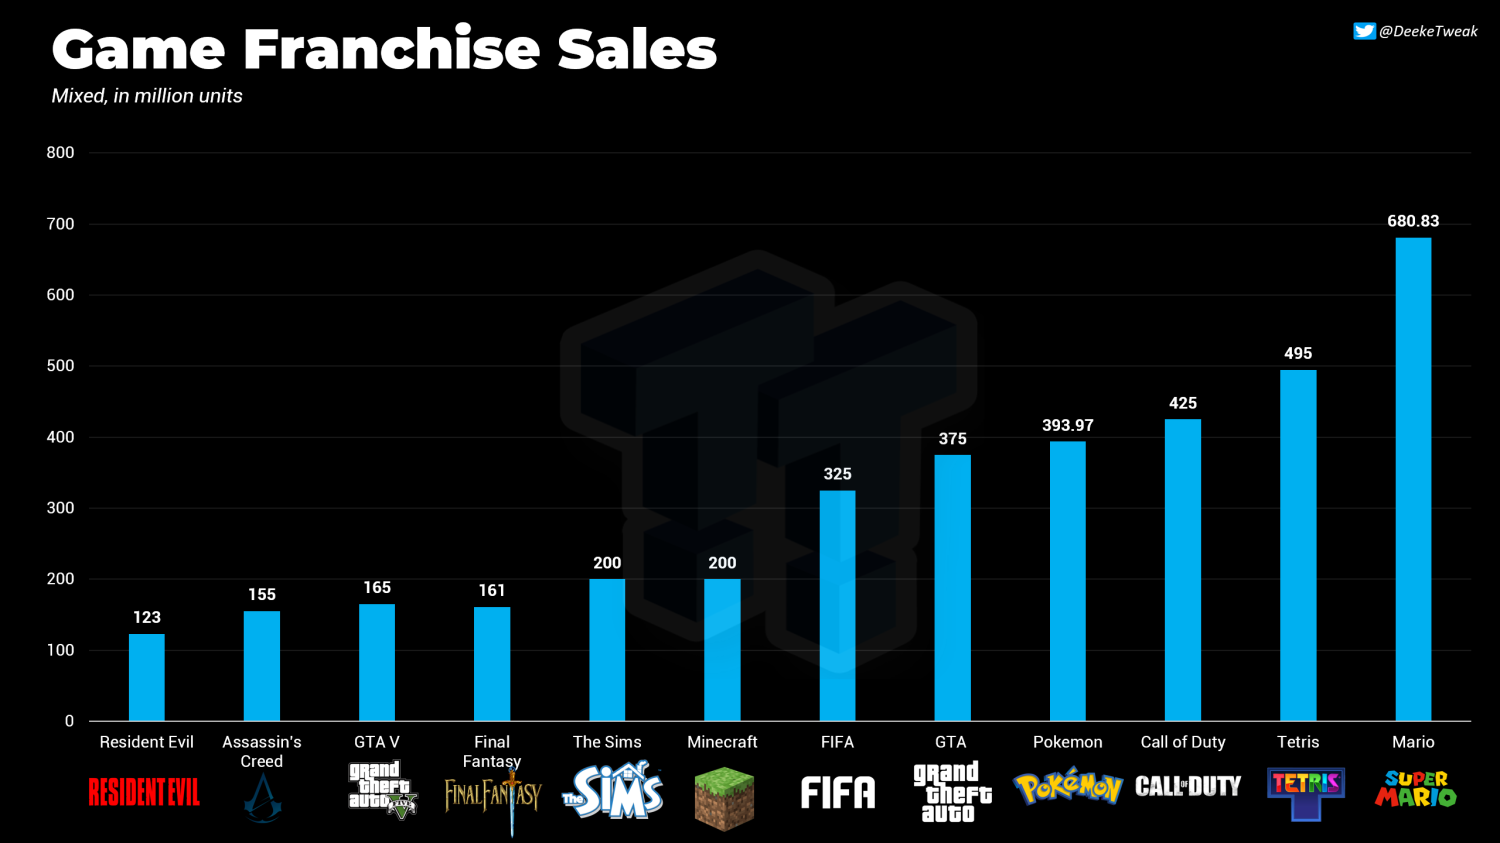 86728_82022_activision-sold-25-million-call-of-duty-games-in-one-year_full.png